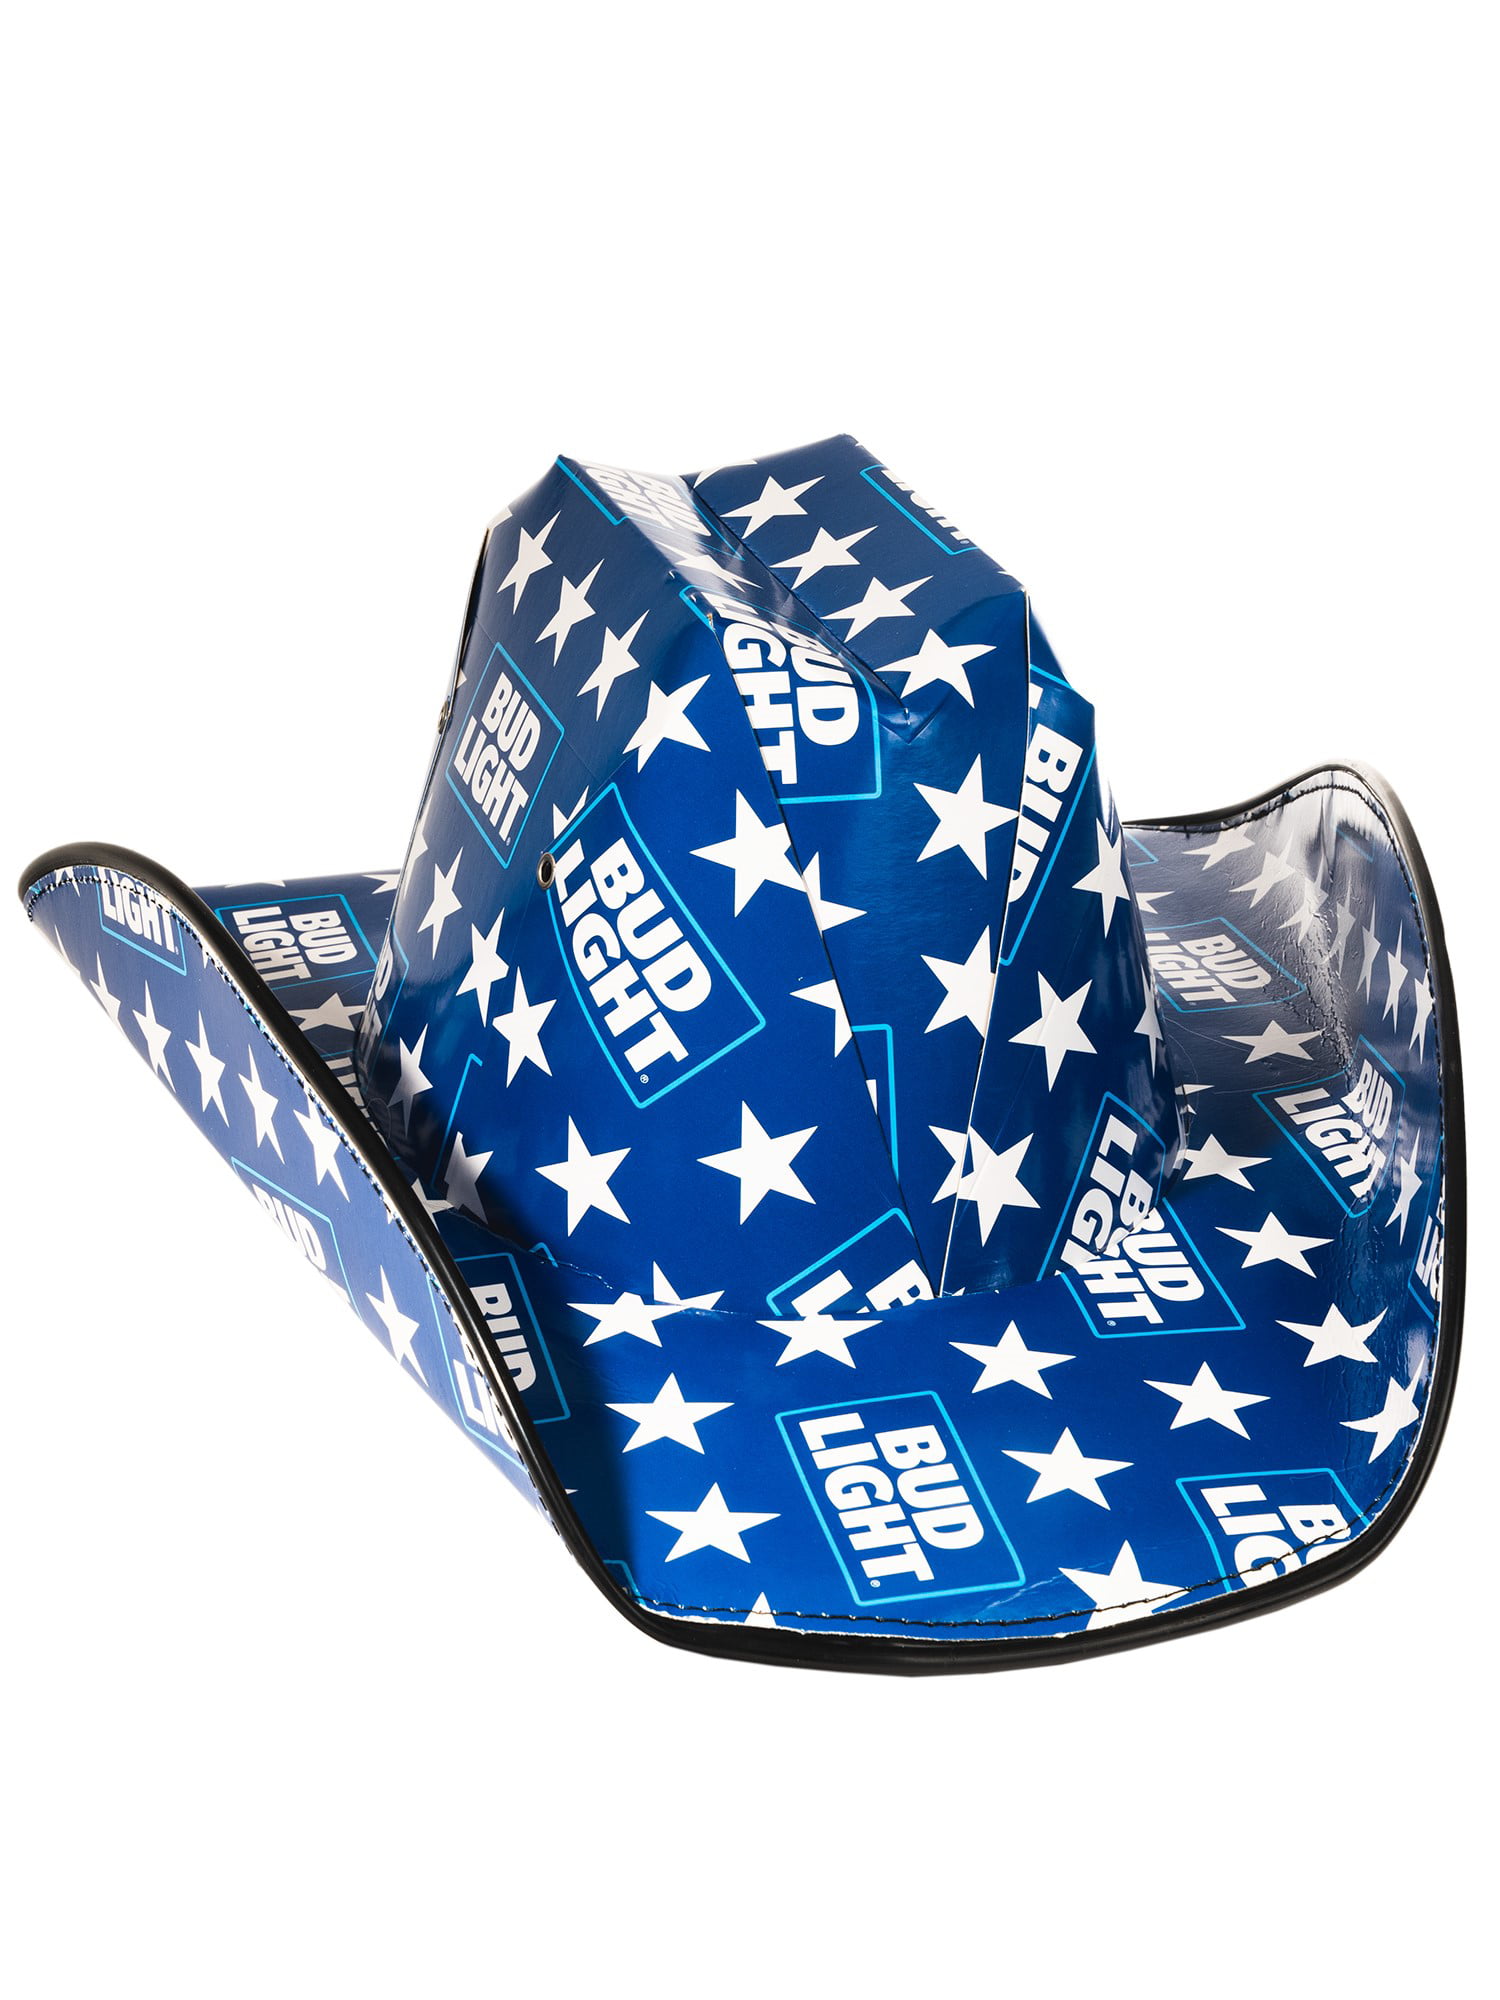 Bud Light Cowboy Cowgirl Hat Beer Box Cardboard Novelty White Blue-NEW 